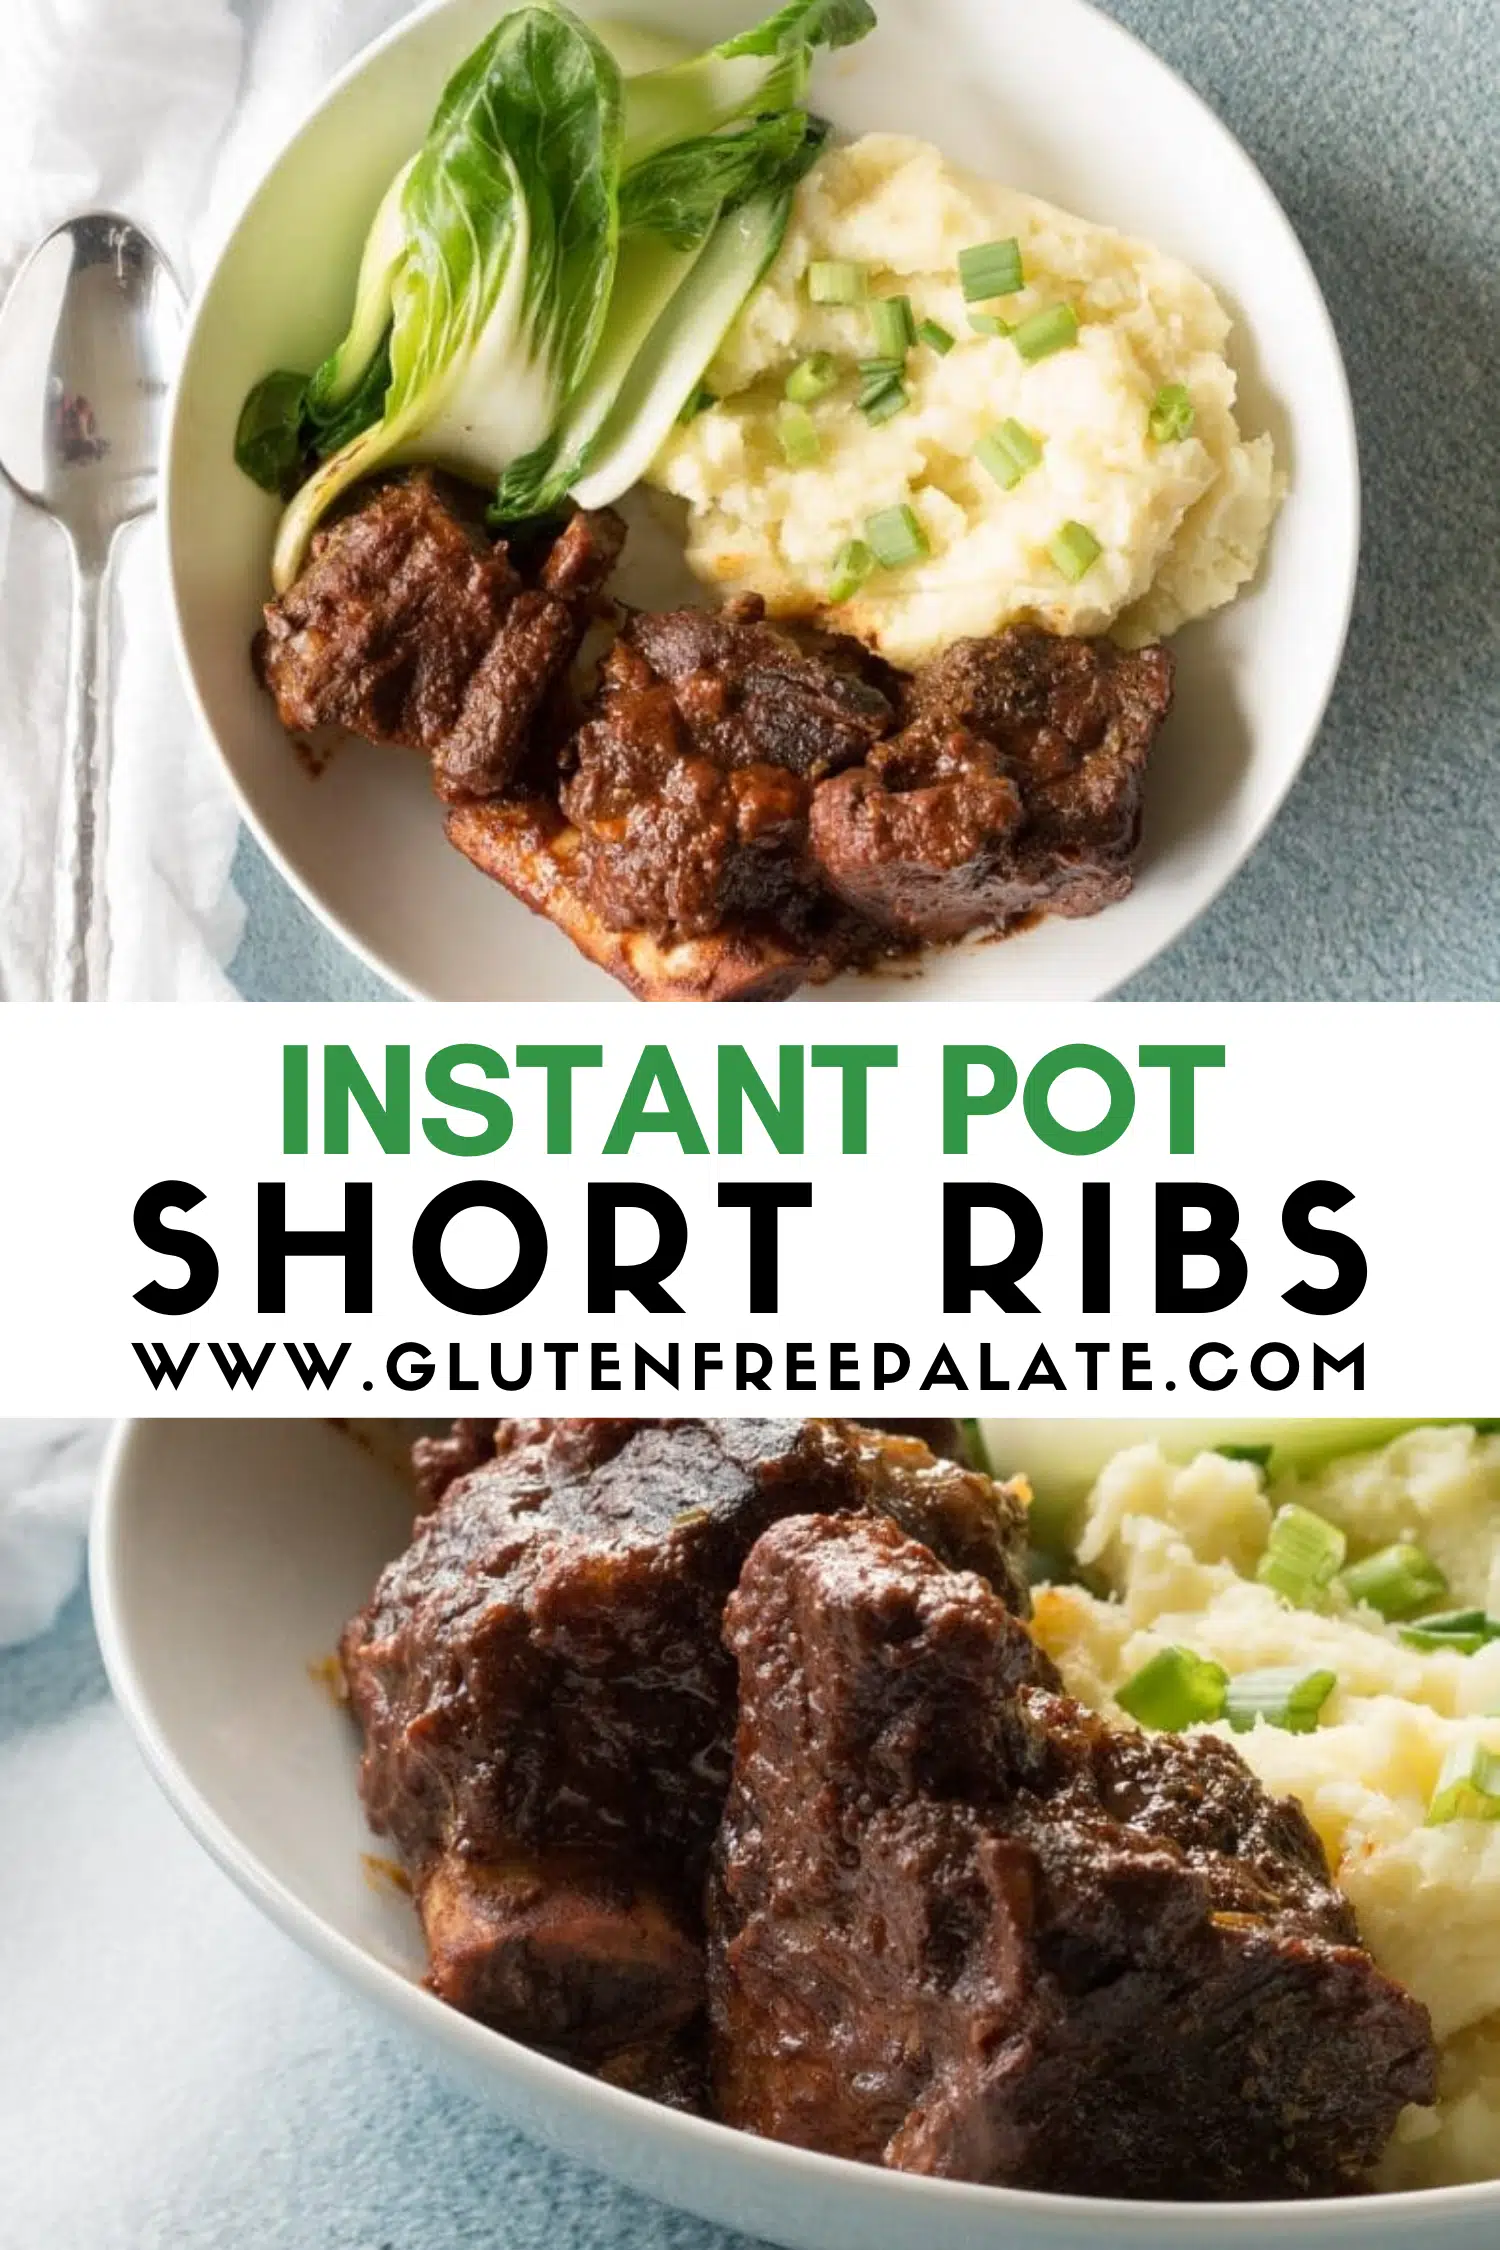 images of plated instant pot short ribs with text overlay.